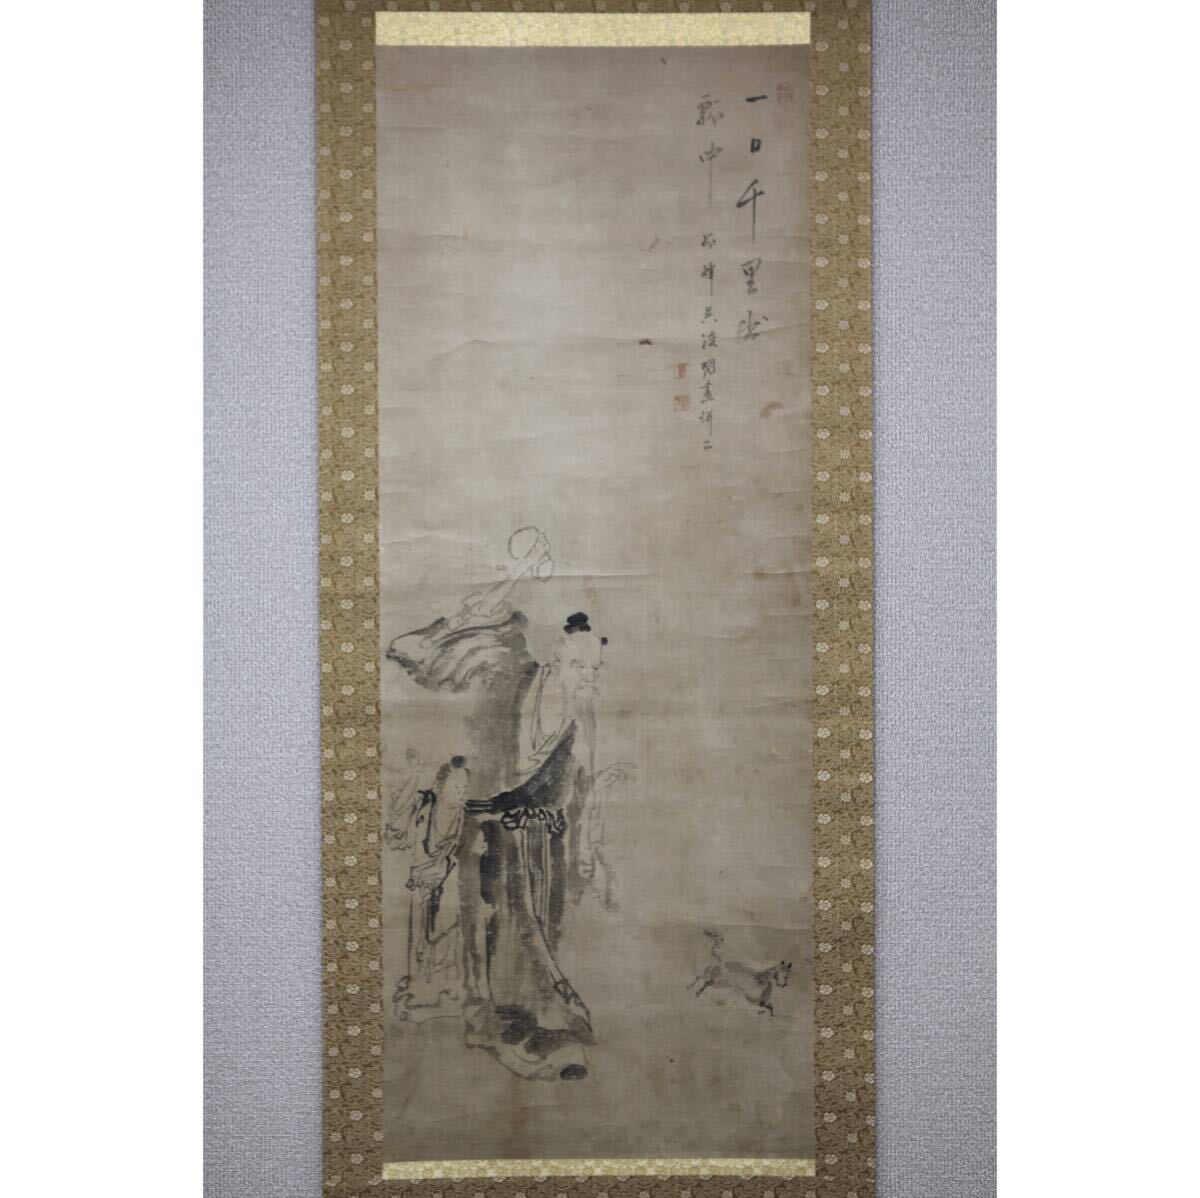 [Authentic work] [Windmill] Dr. Igarashi, Dr. Wu, A Thousand Miles in a Day ◎ Handwritten paperback ◎ People from Niigata, mid-Edo period, Dharma eye, Song Yuan style, Chinese painting, painting, Japanese painting, person, Bodhisattva